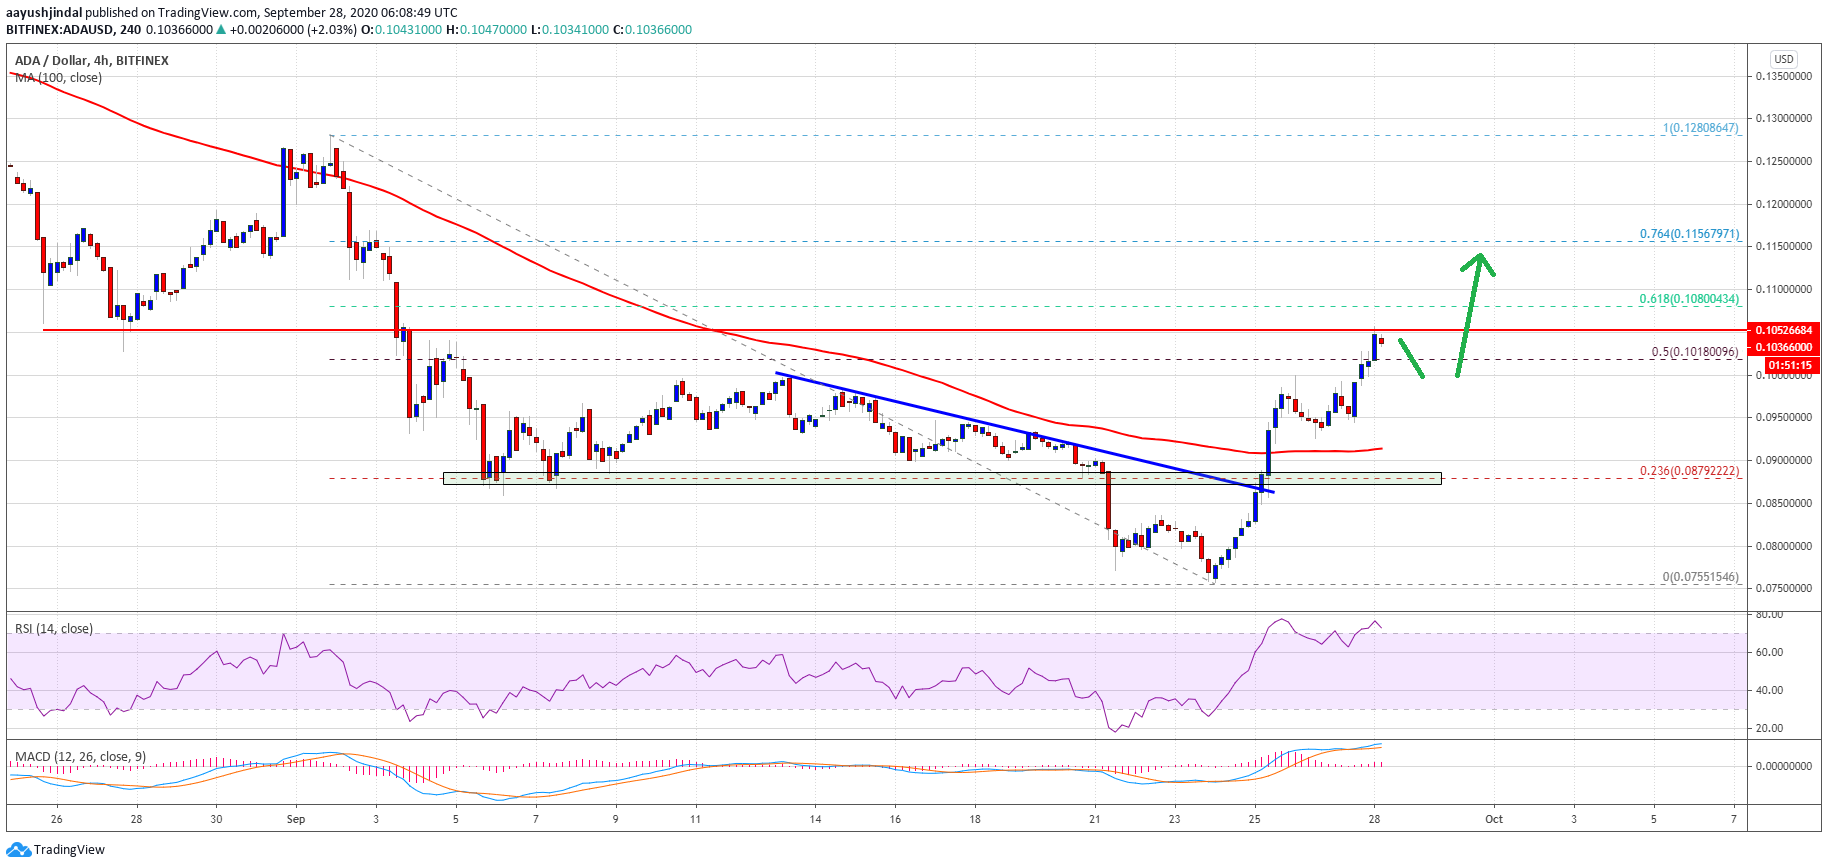 Cardano (ADA) Rally Could Gather Steam Above This Key Breakout Resistance